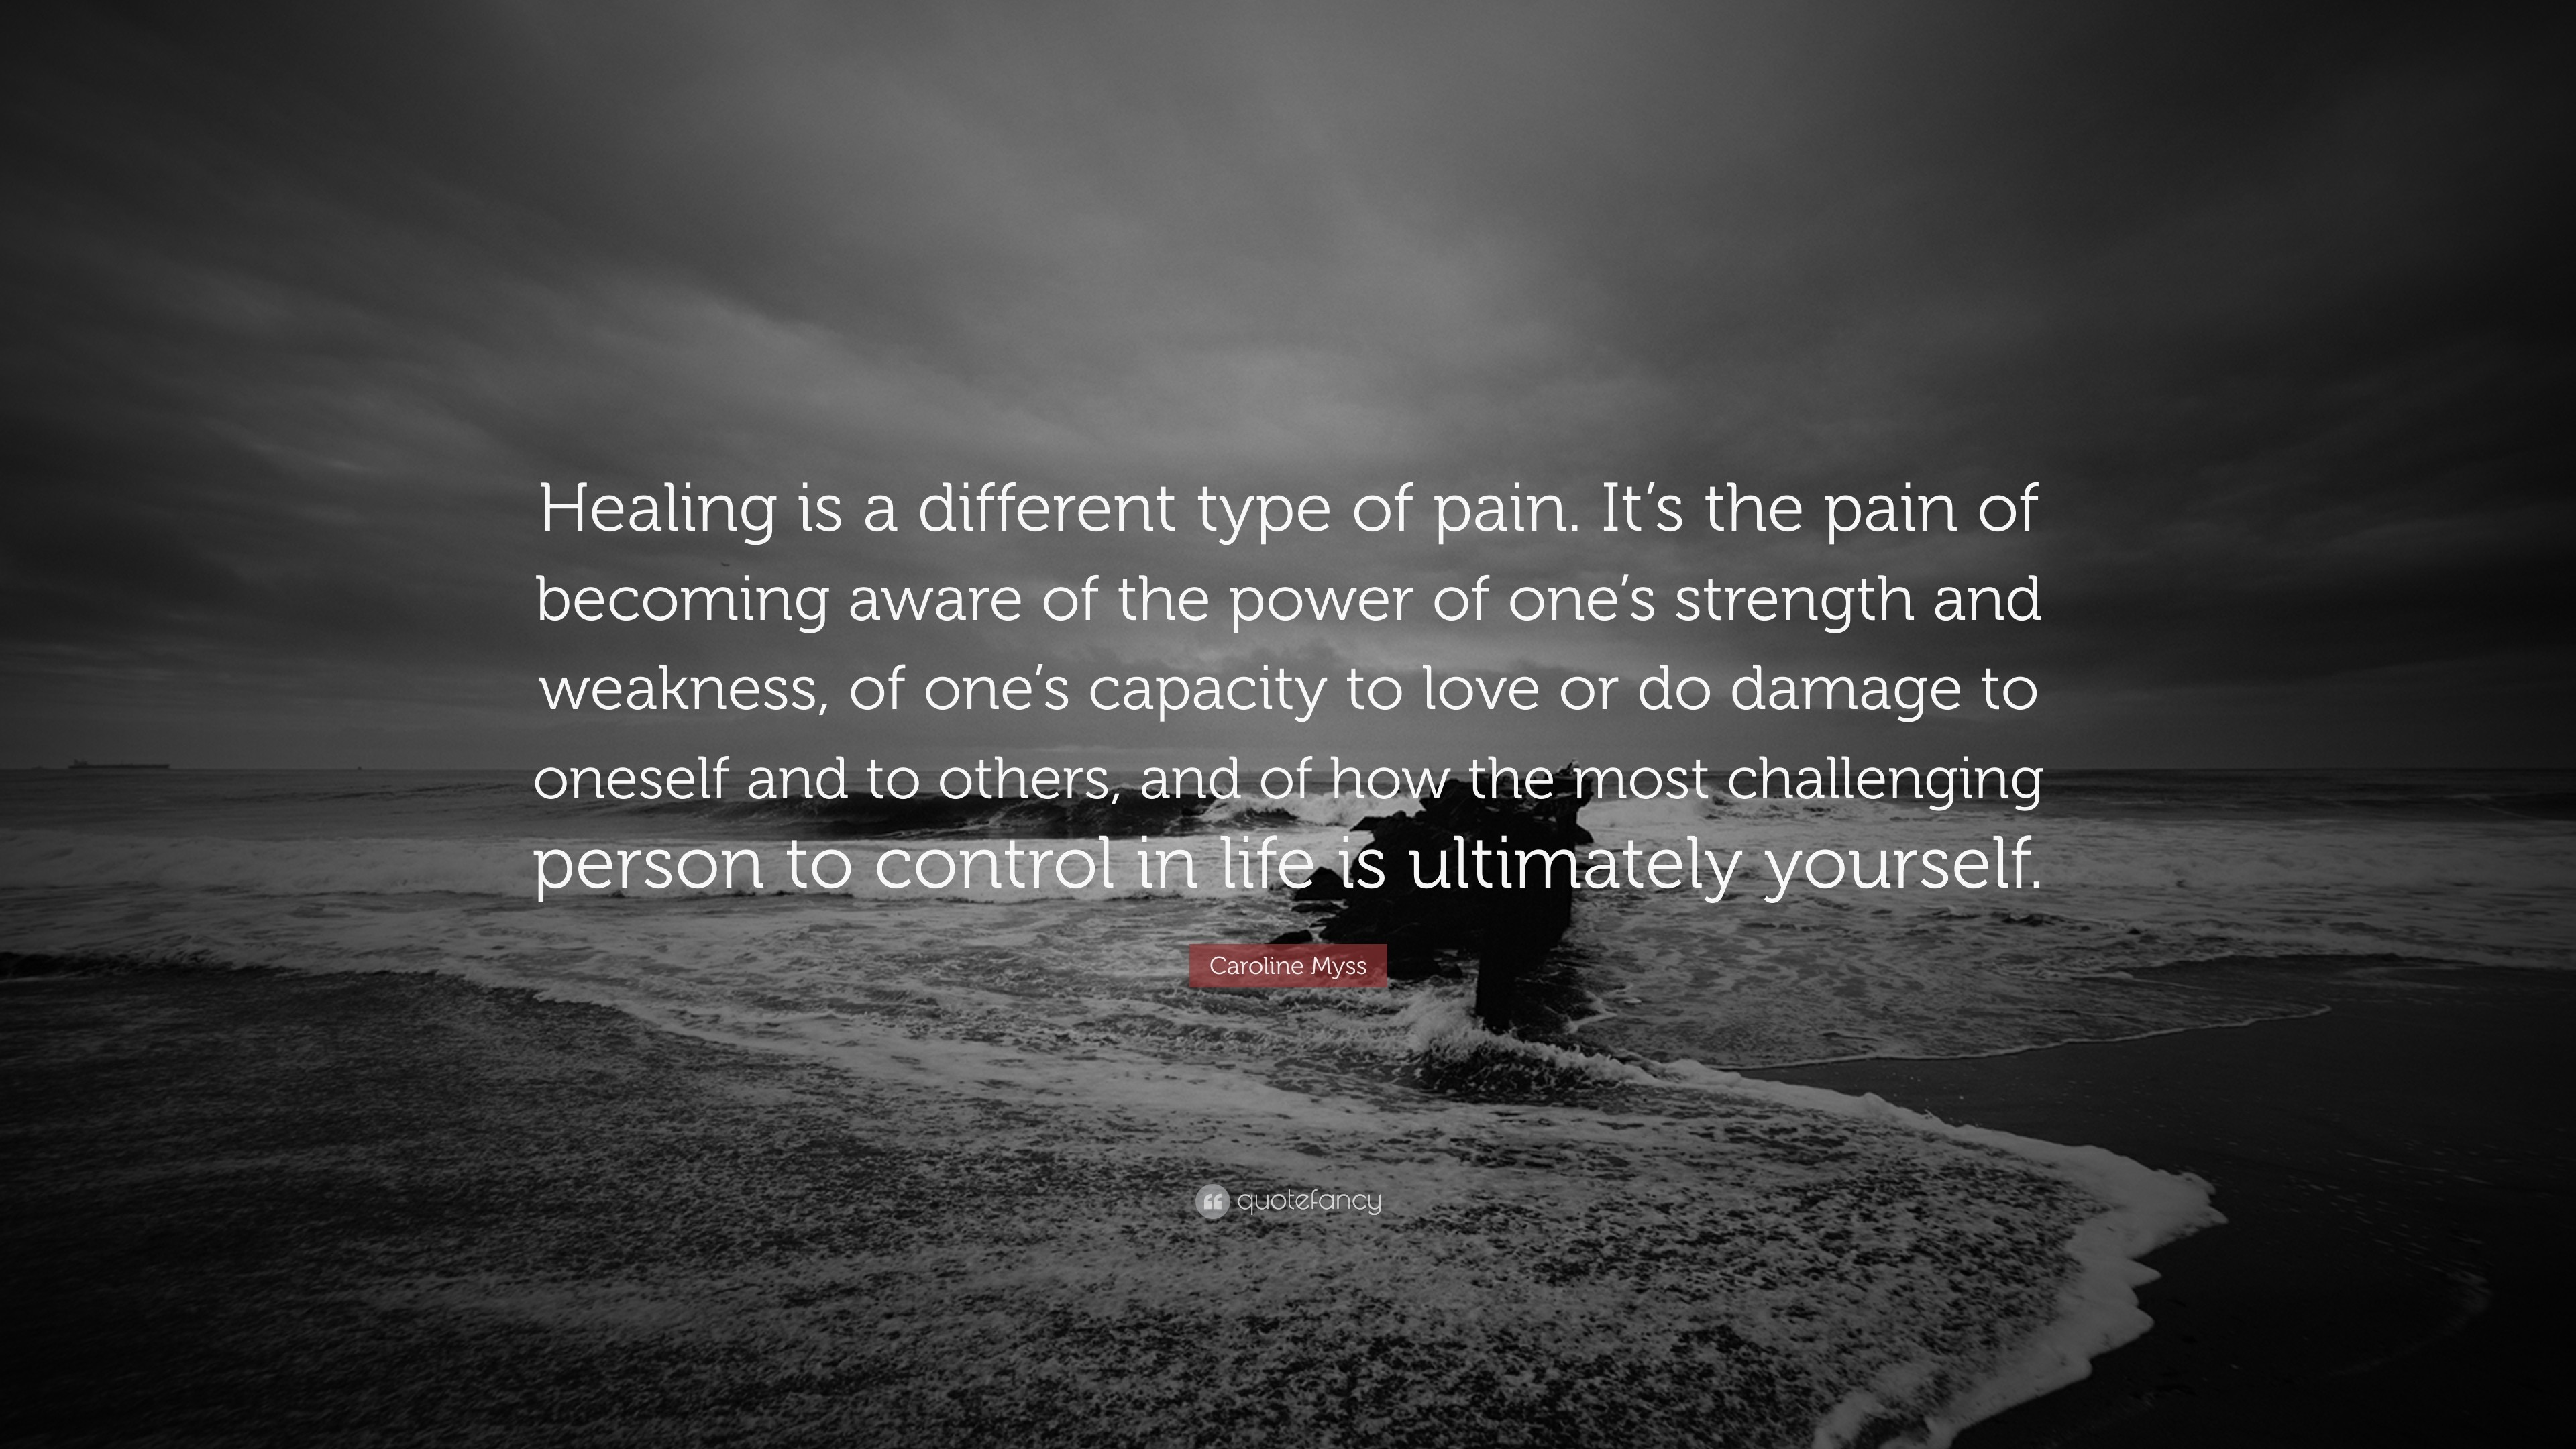 3840x2160 Caroline Myss Quote: “Healing is a different type of pain. It's the pain